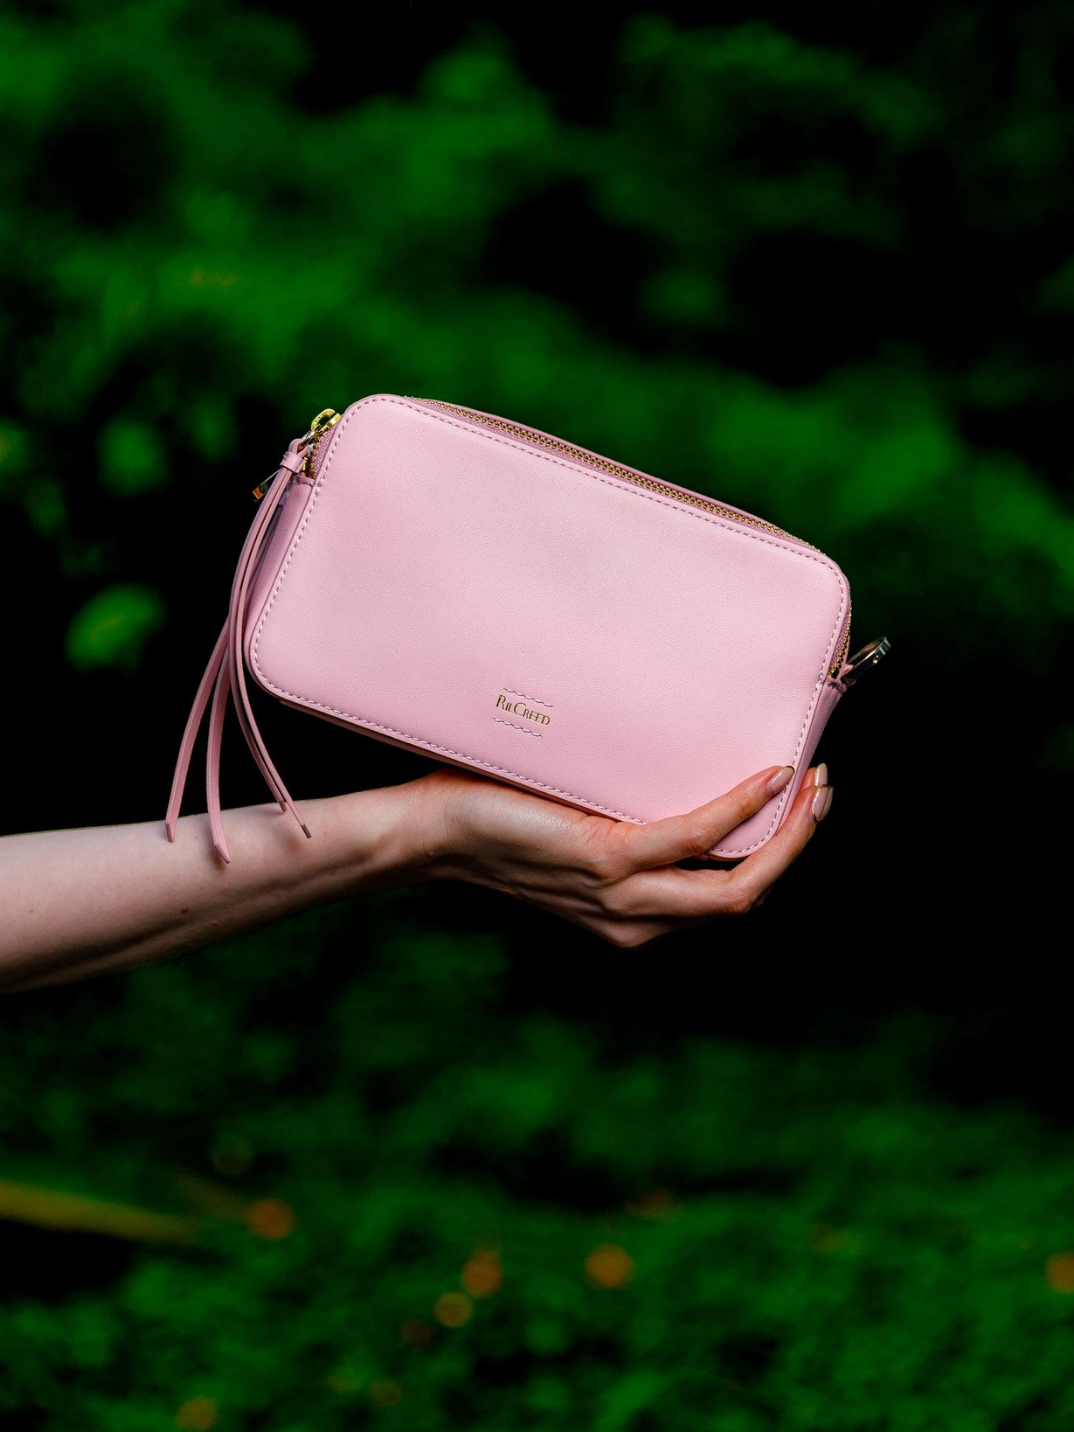 Ril Creed Polly crossbody bag ethically made from upcycled scrap leather ethical fashion brand based in Hong Kong